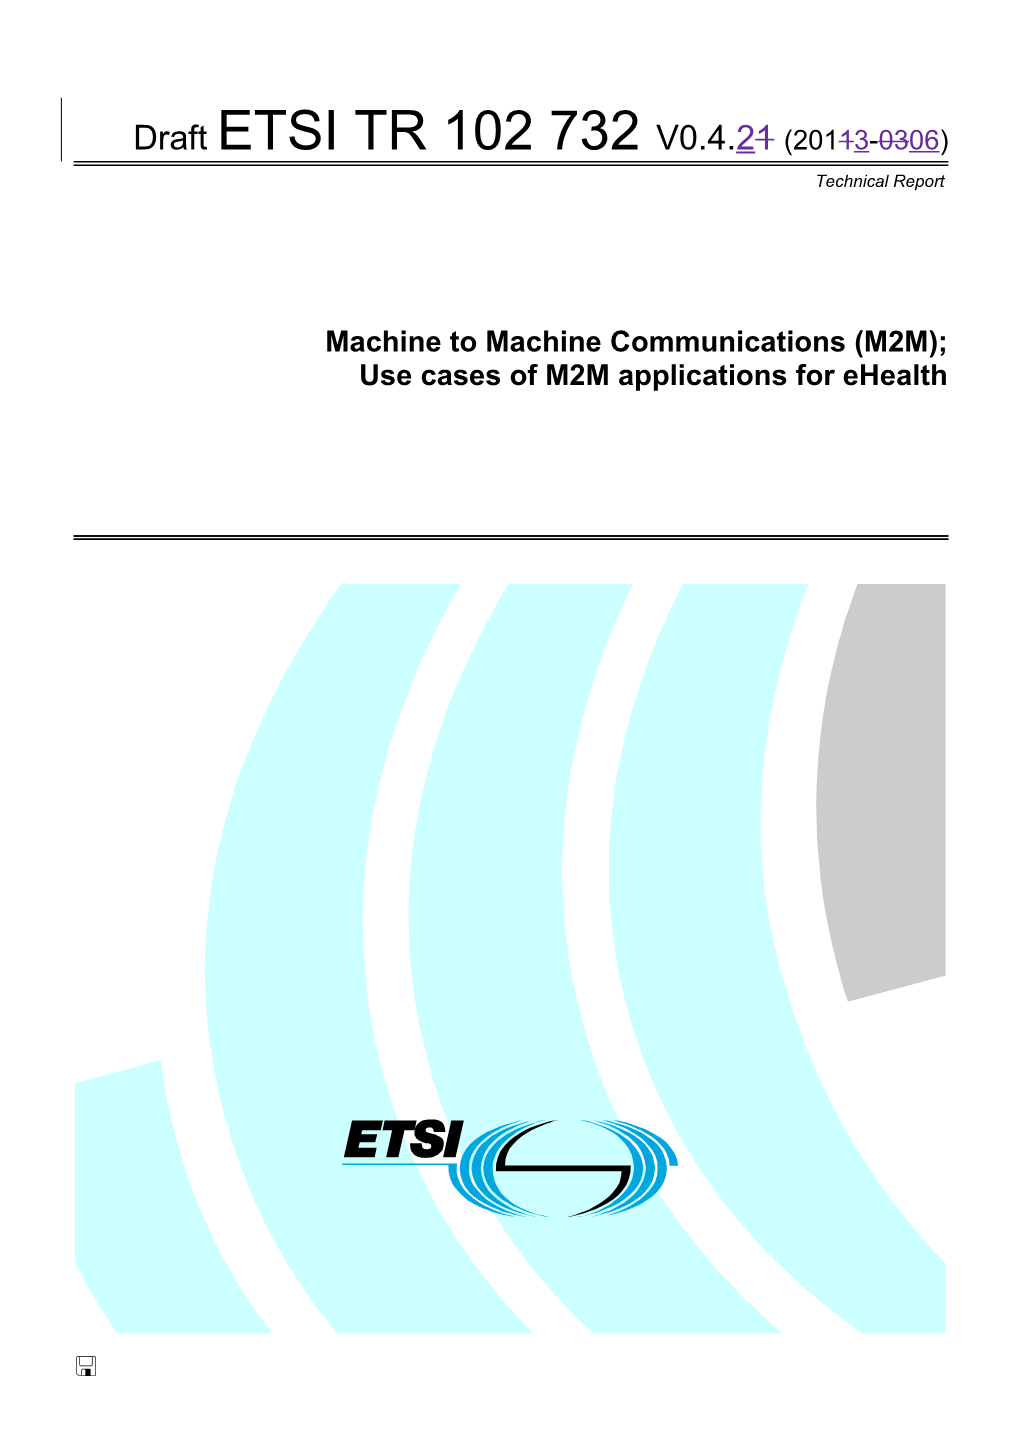 Use Cases of M2M Applications for Ehealth